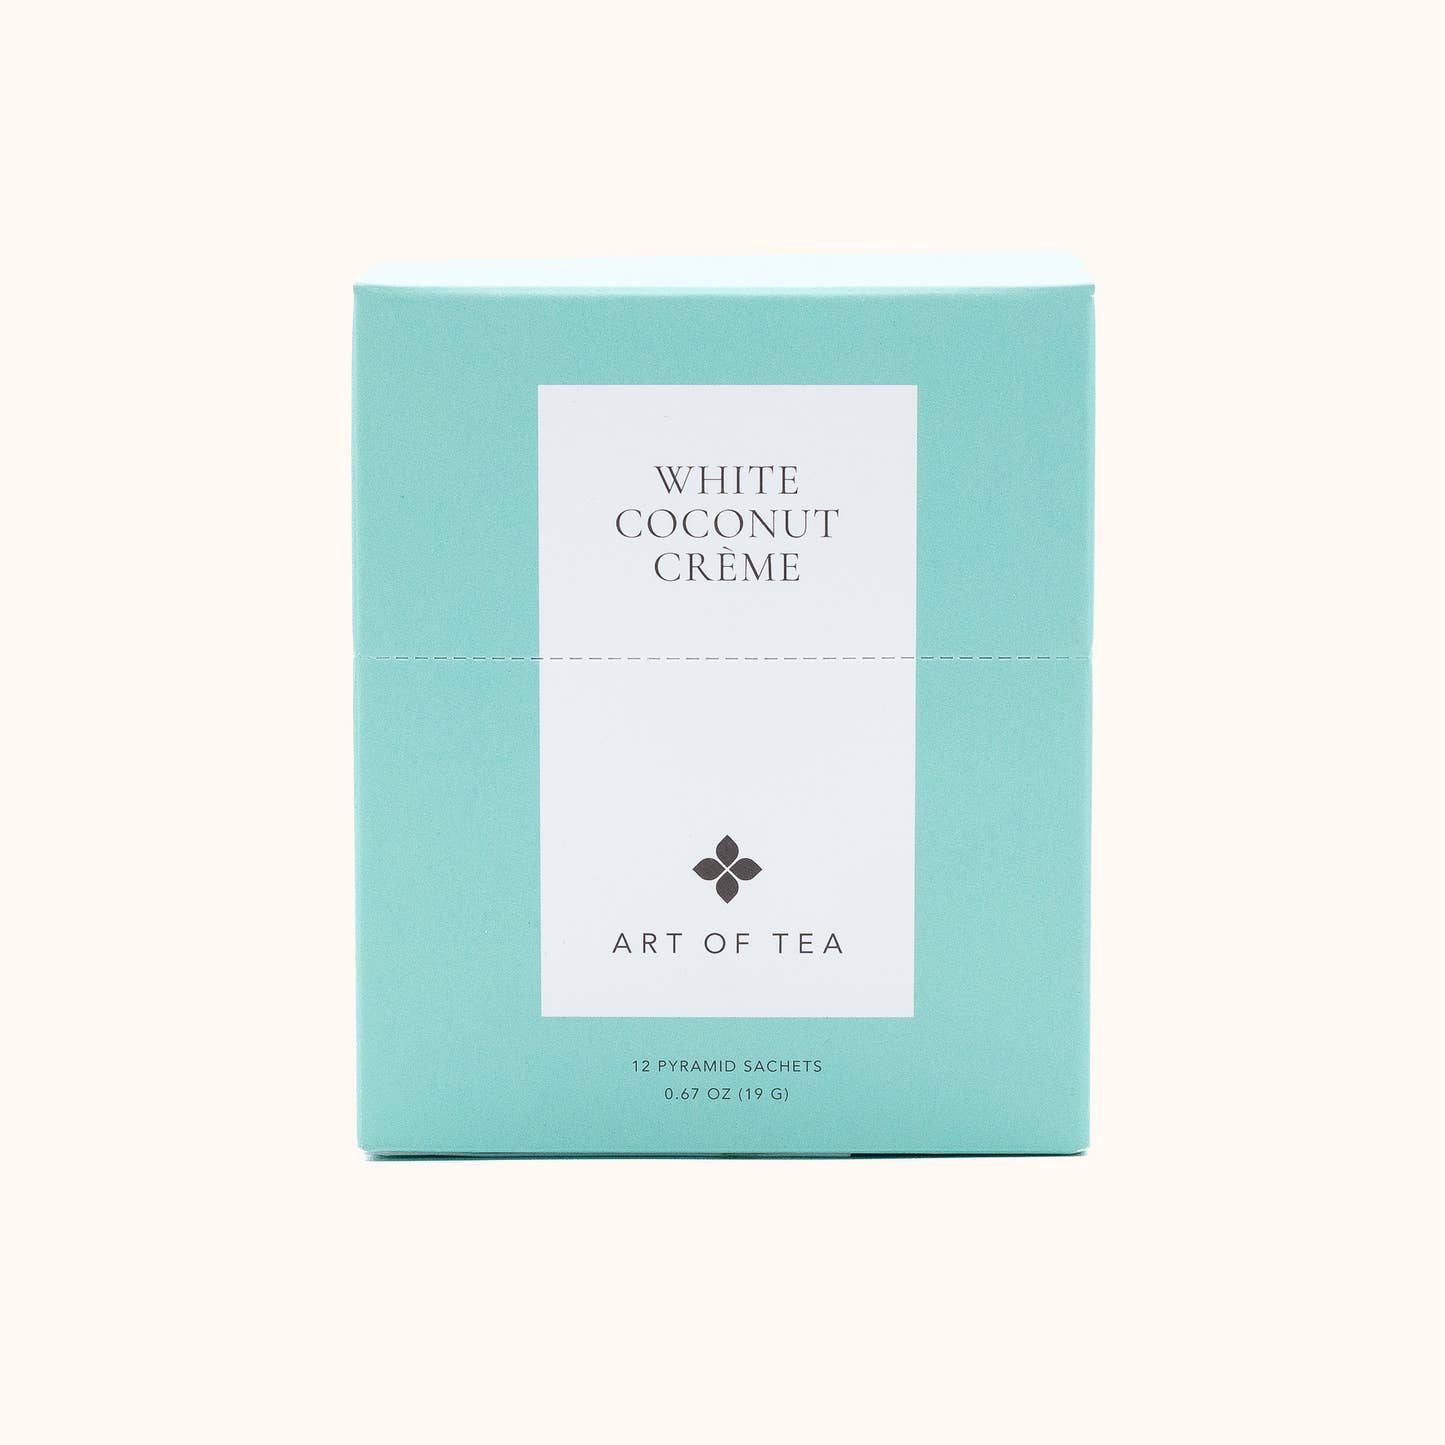 Turquoise and white tea box for Art of Tea's White Coconut Crème